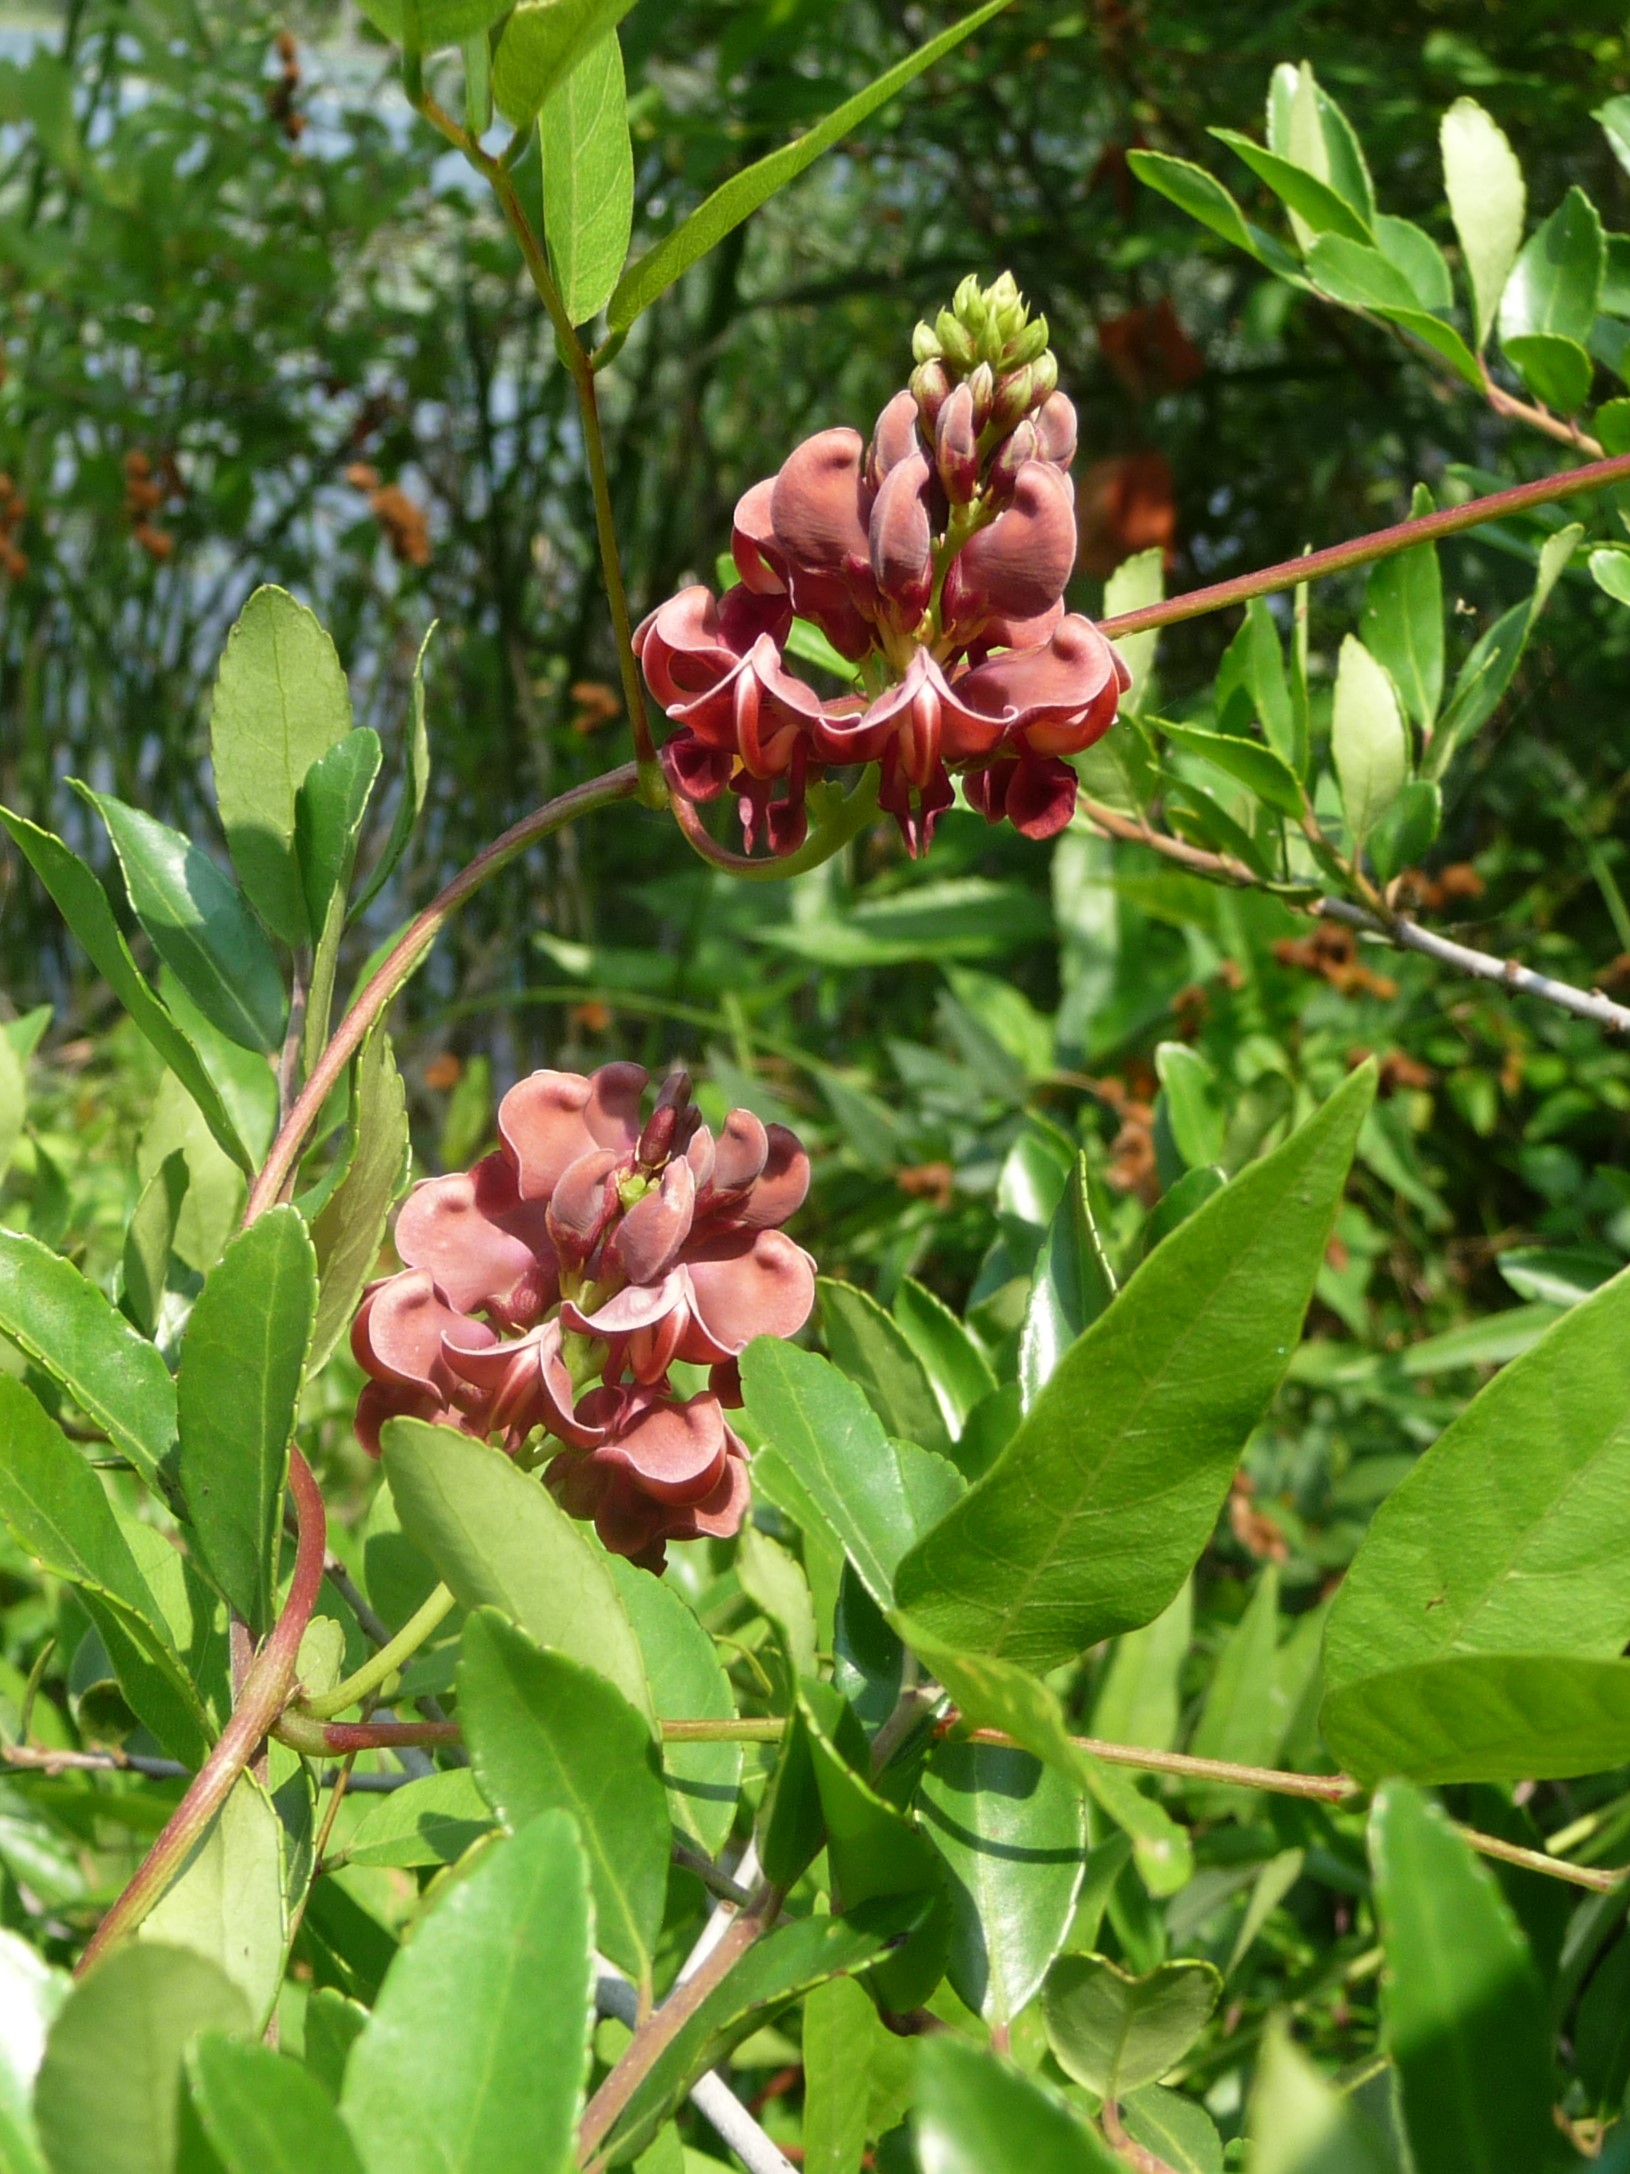 The Scientific Name is Apios americana. You will likely hear them called Common Groundnut. This picture shows the A semi-woody vine with pinnately compound leaves in wetlands. of Apios americana